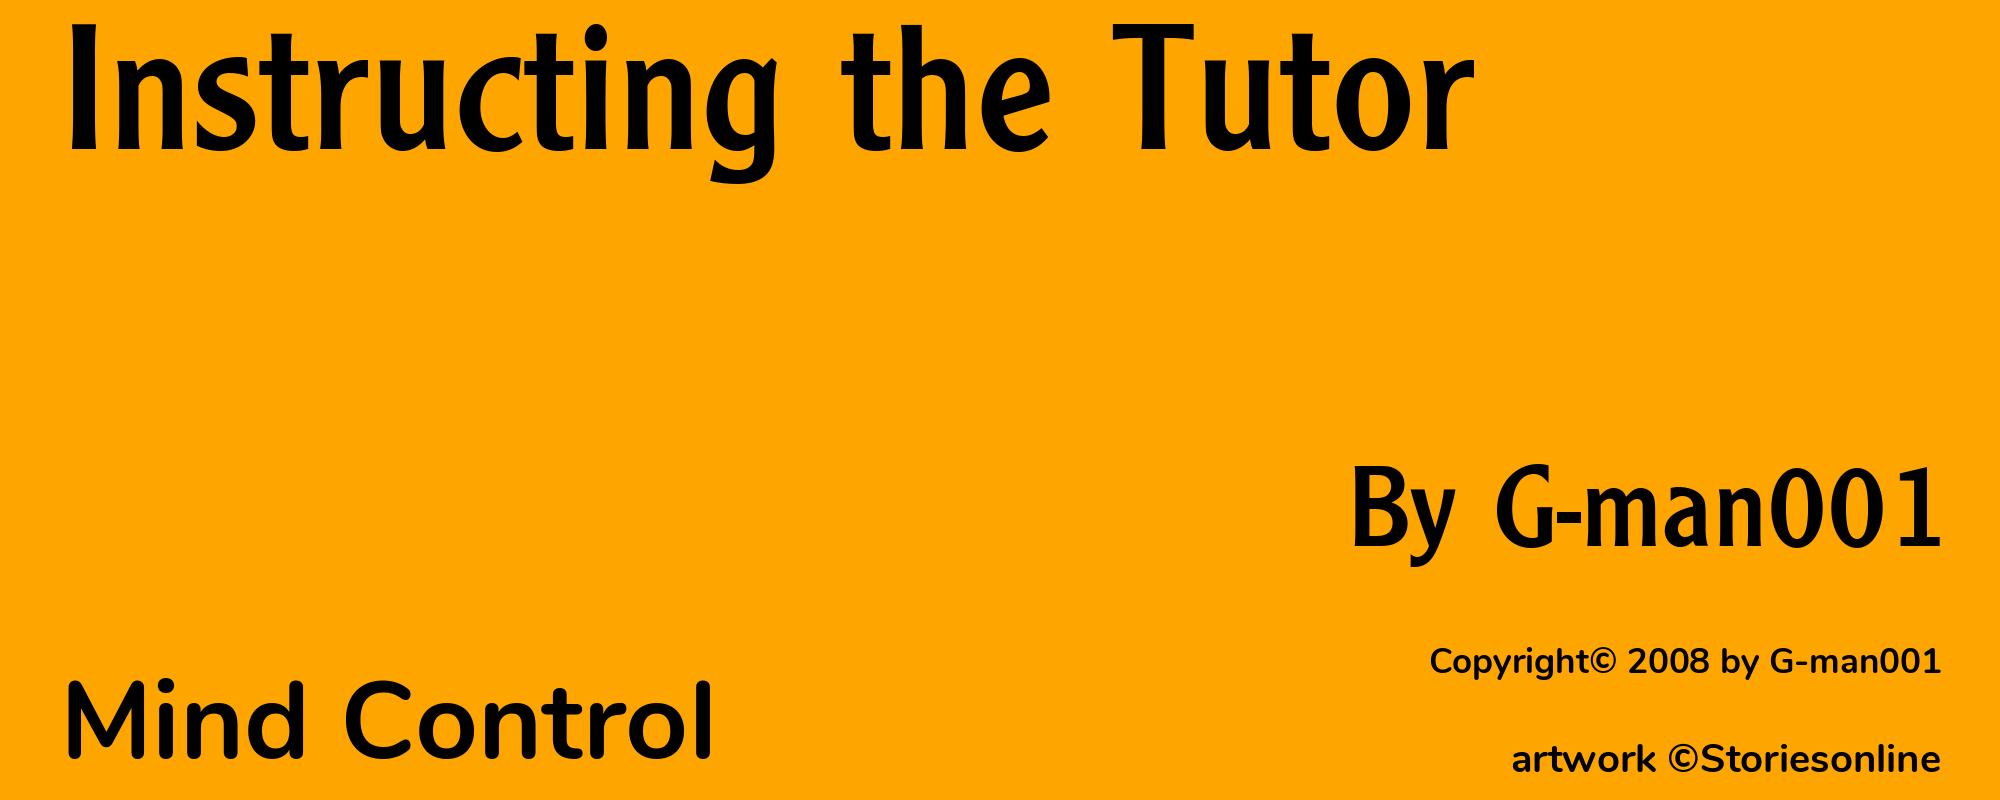 Instructing the Tutor - Cover